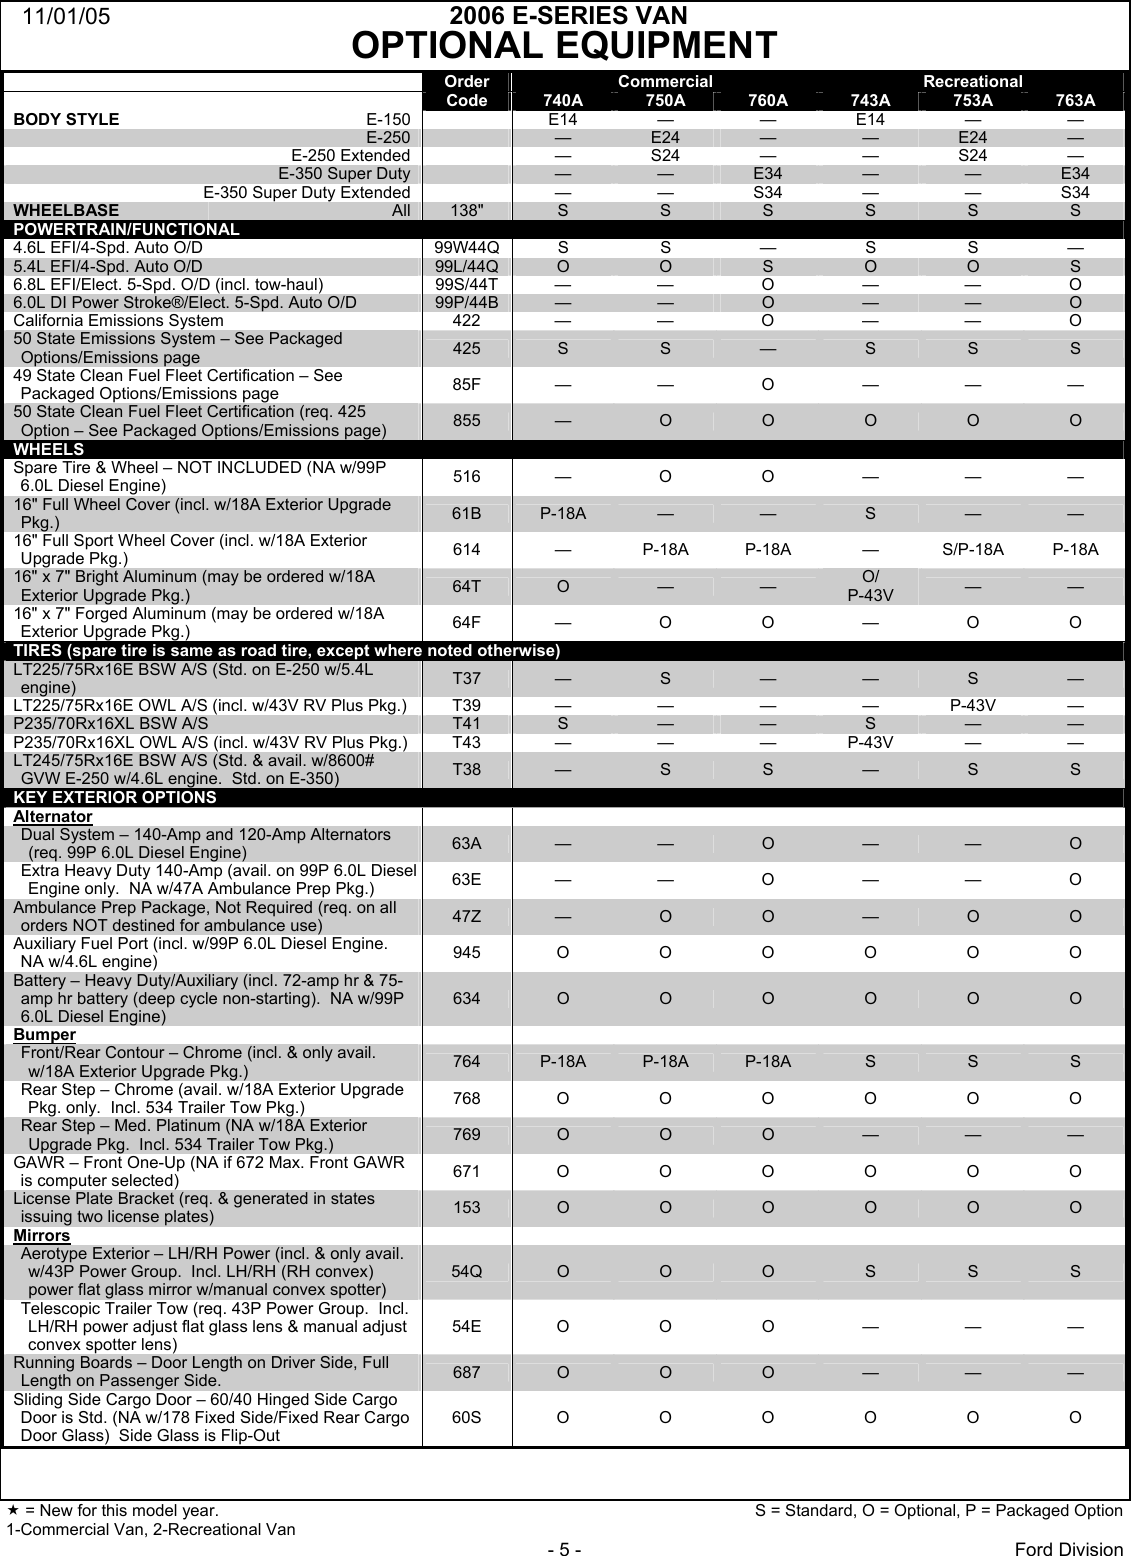 Page 5 of 12 - Ford Ford-2006-E-Series-Specification-Sheet 68xE-Series VanCom